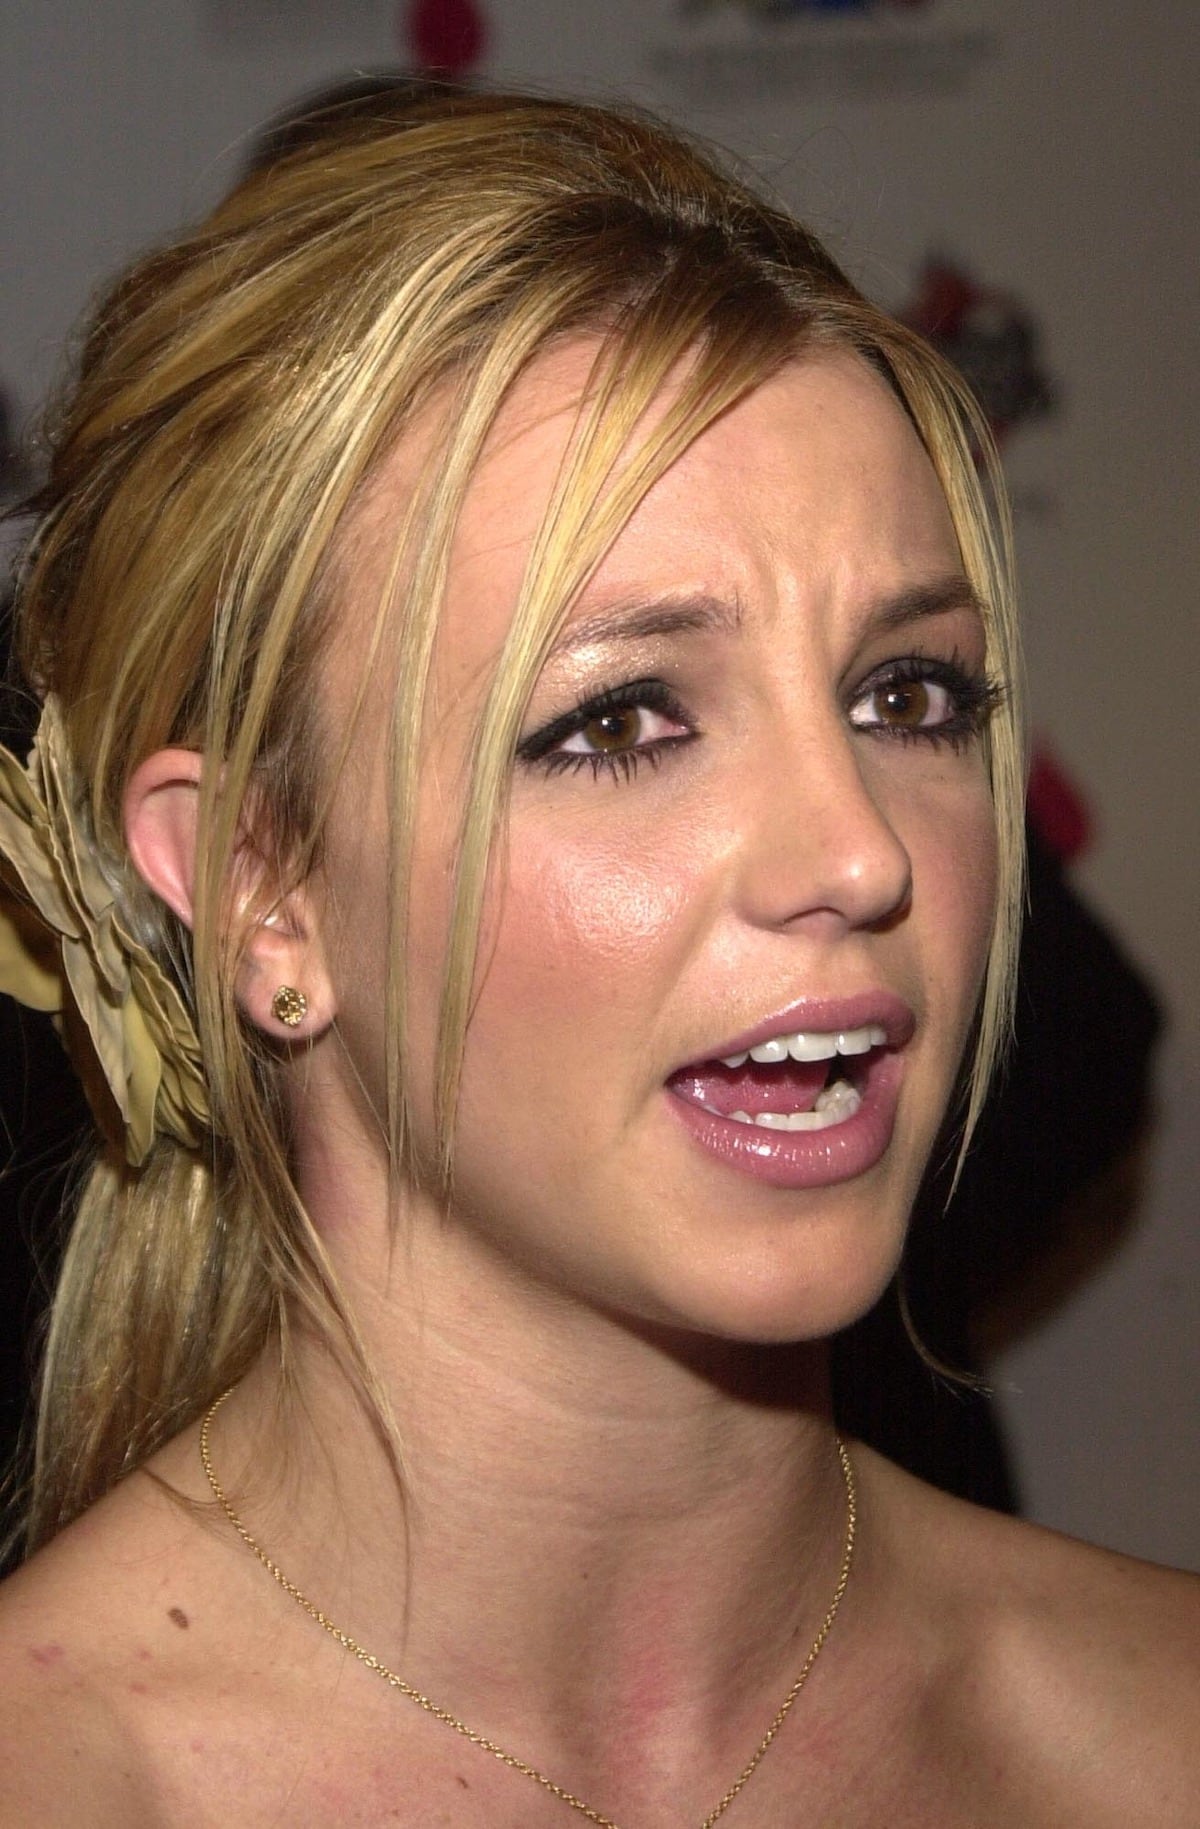 Britney Spears Issues Cease And Desist Letter To Sister Jamie Lynn Over New Memoir